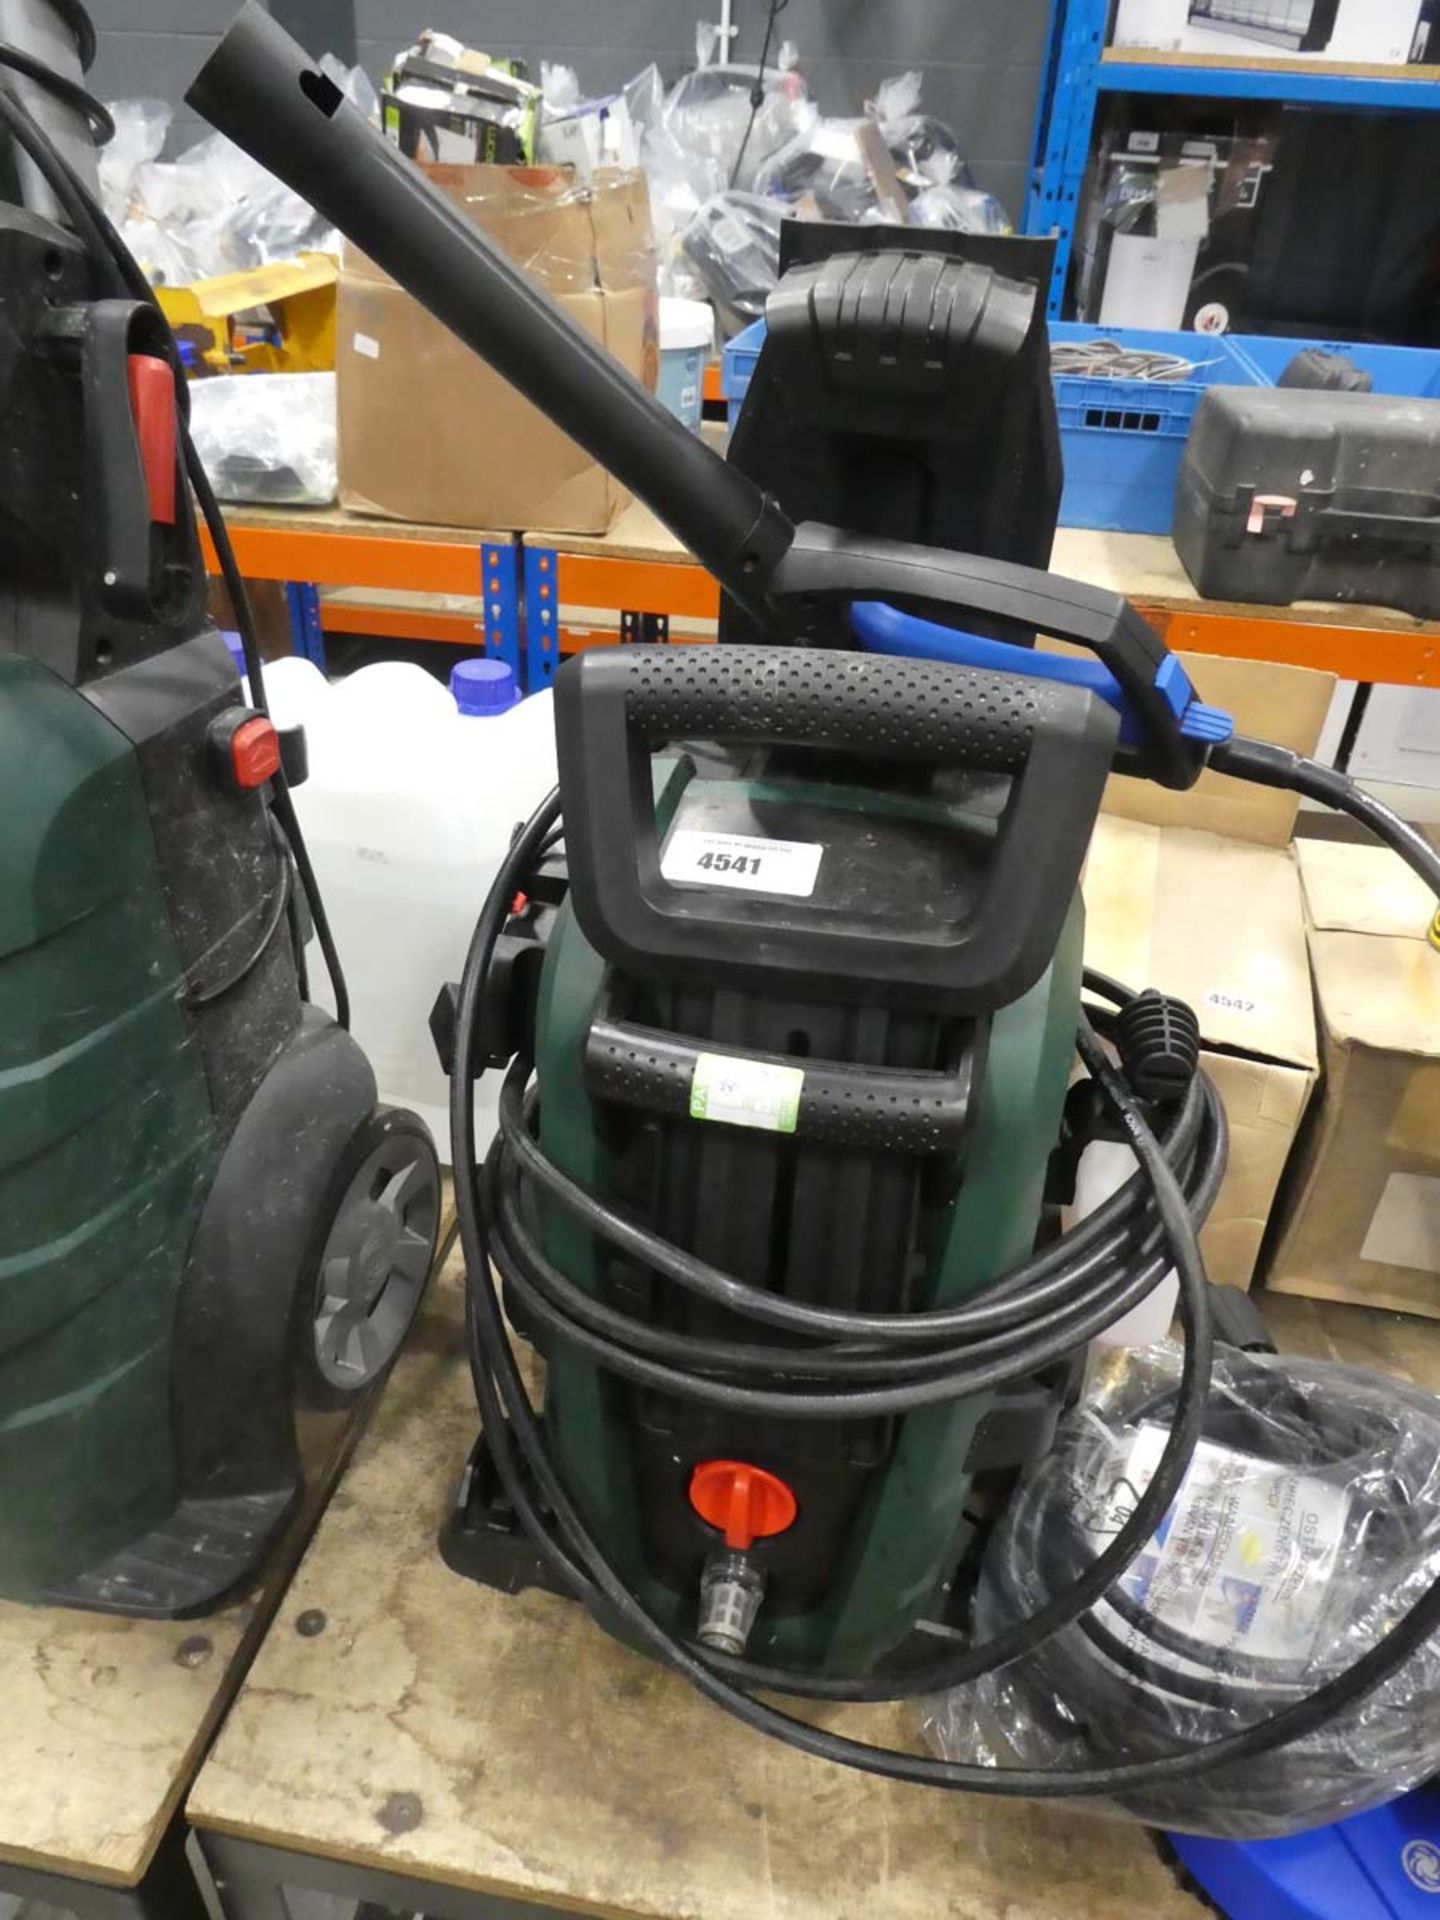 4444 - Bosch Aquattack pressure washer with Nilfisk lance and patio cleaning head